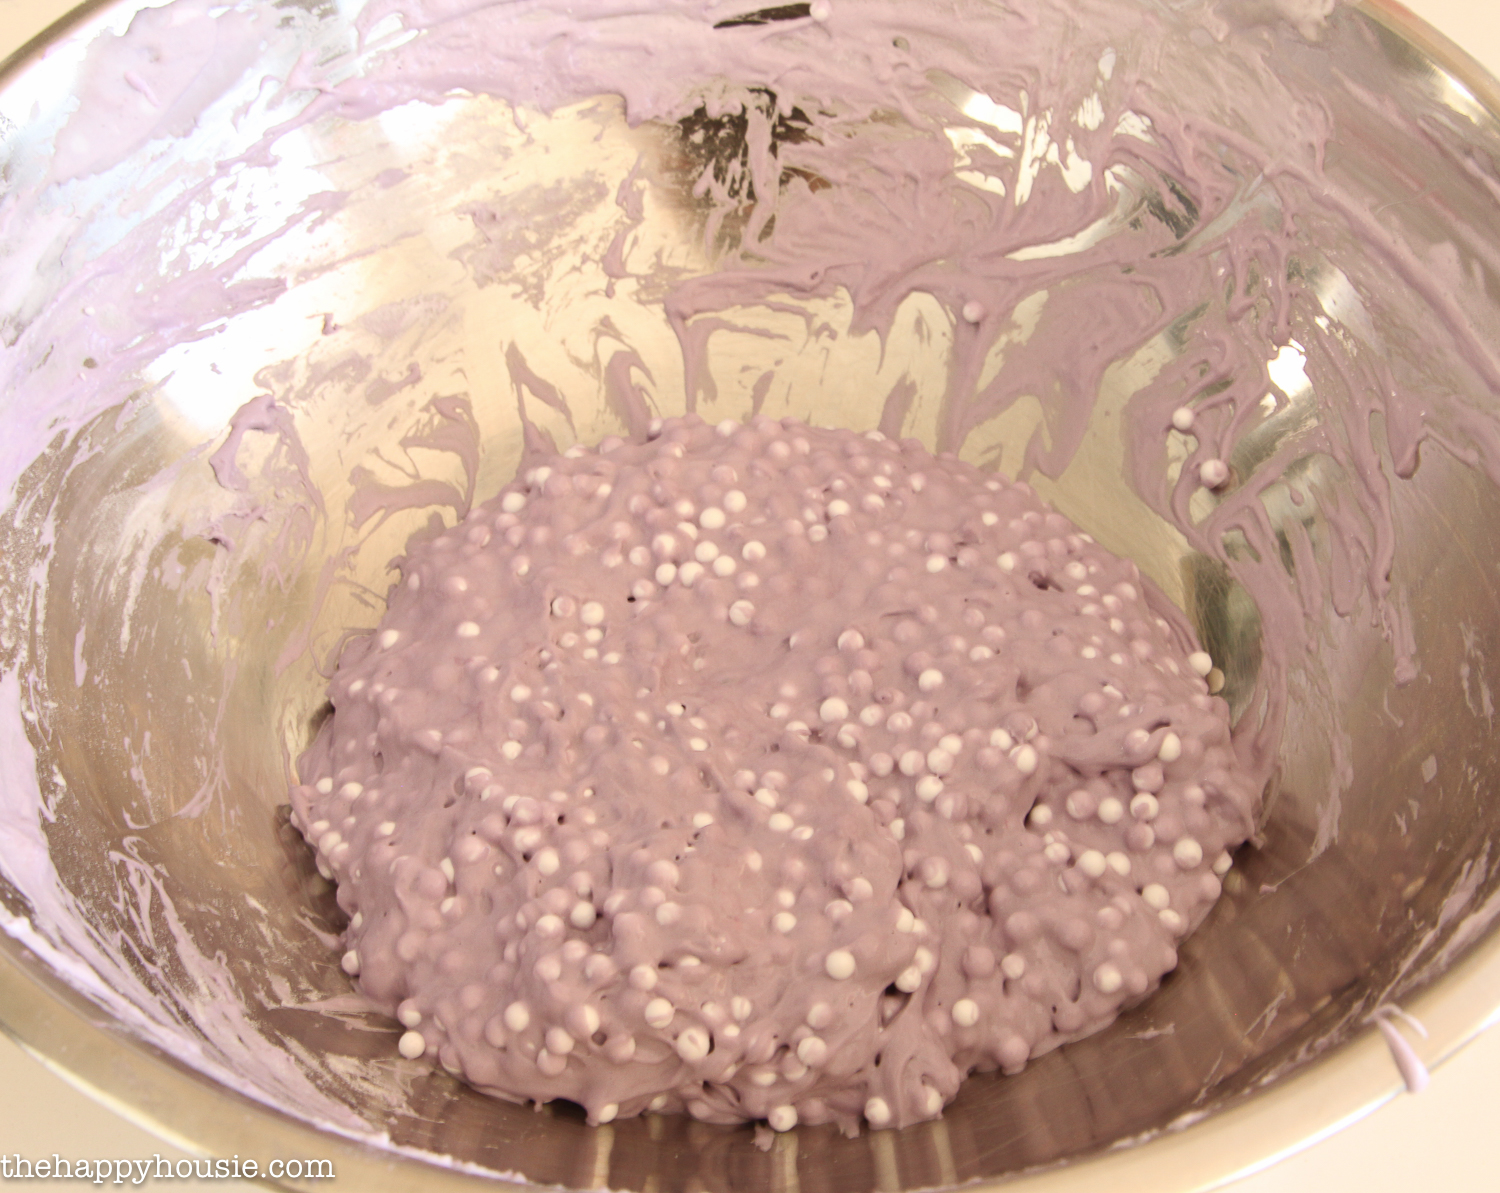 A small ball of slime being mixed in the bowl.